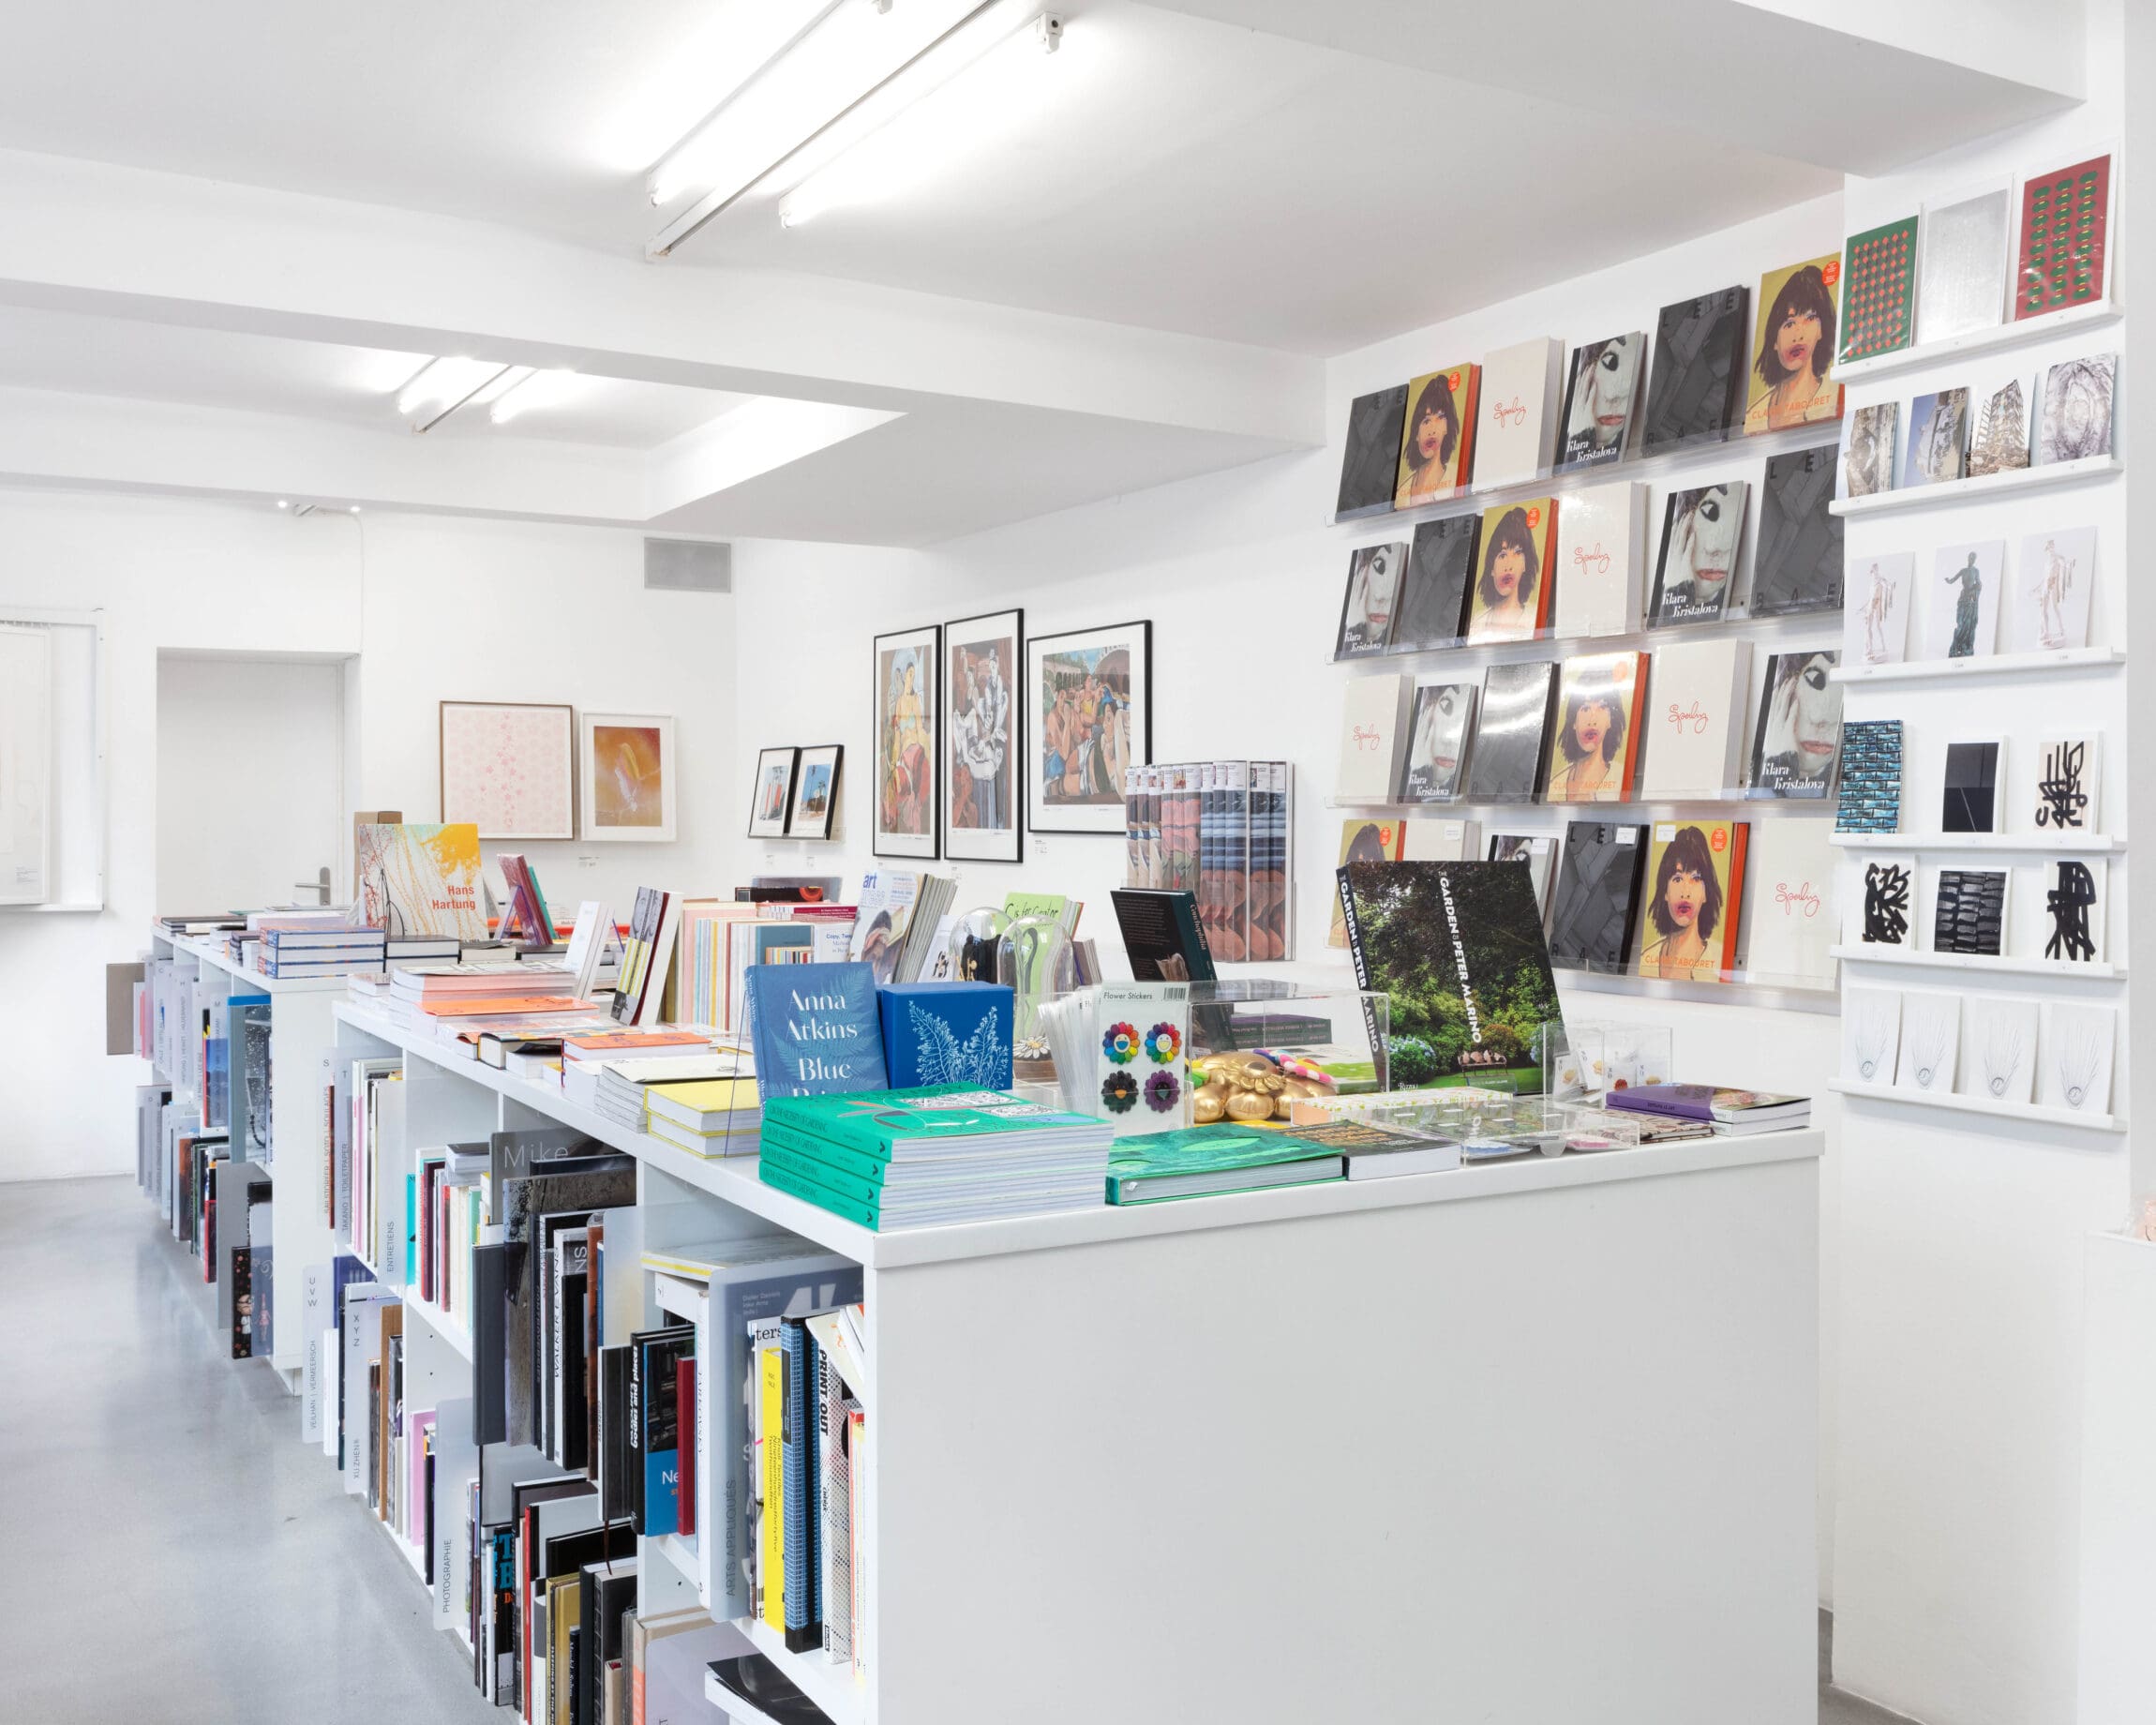 The best art galleries and museums in Paris | Views of Perrotin's Marais bookstore.